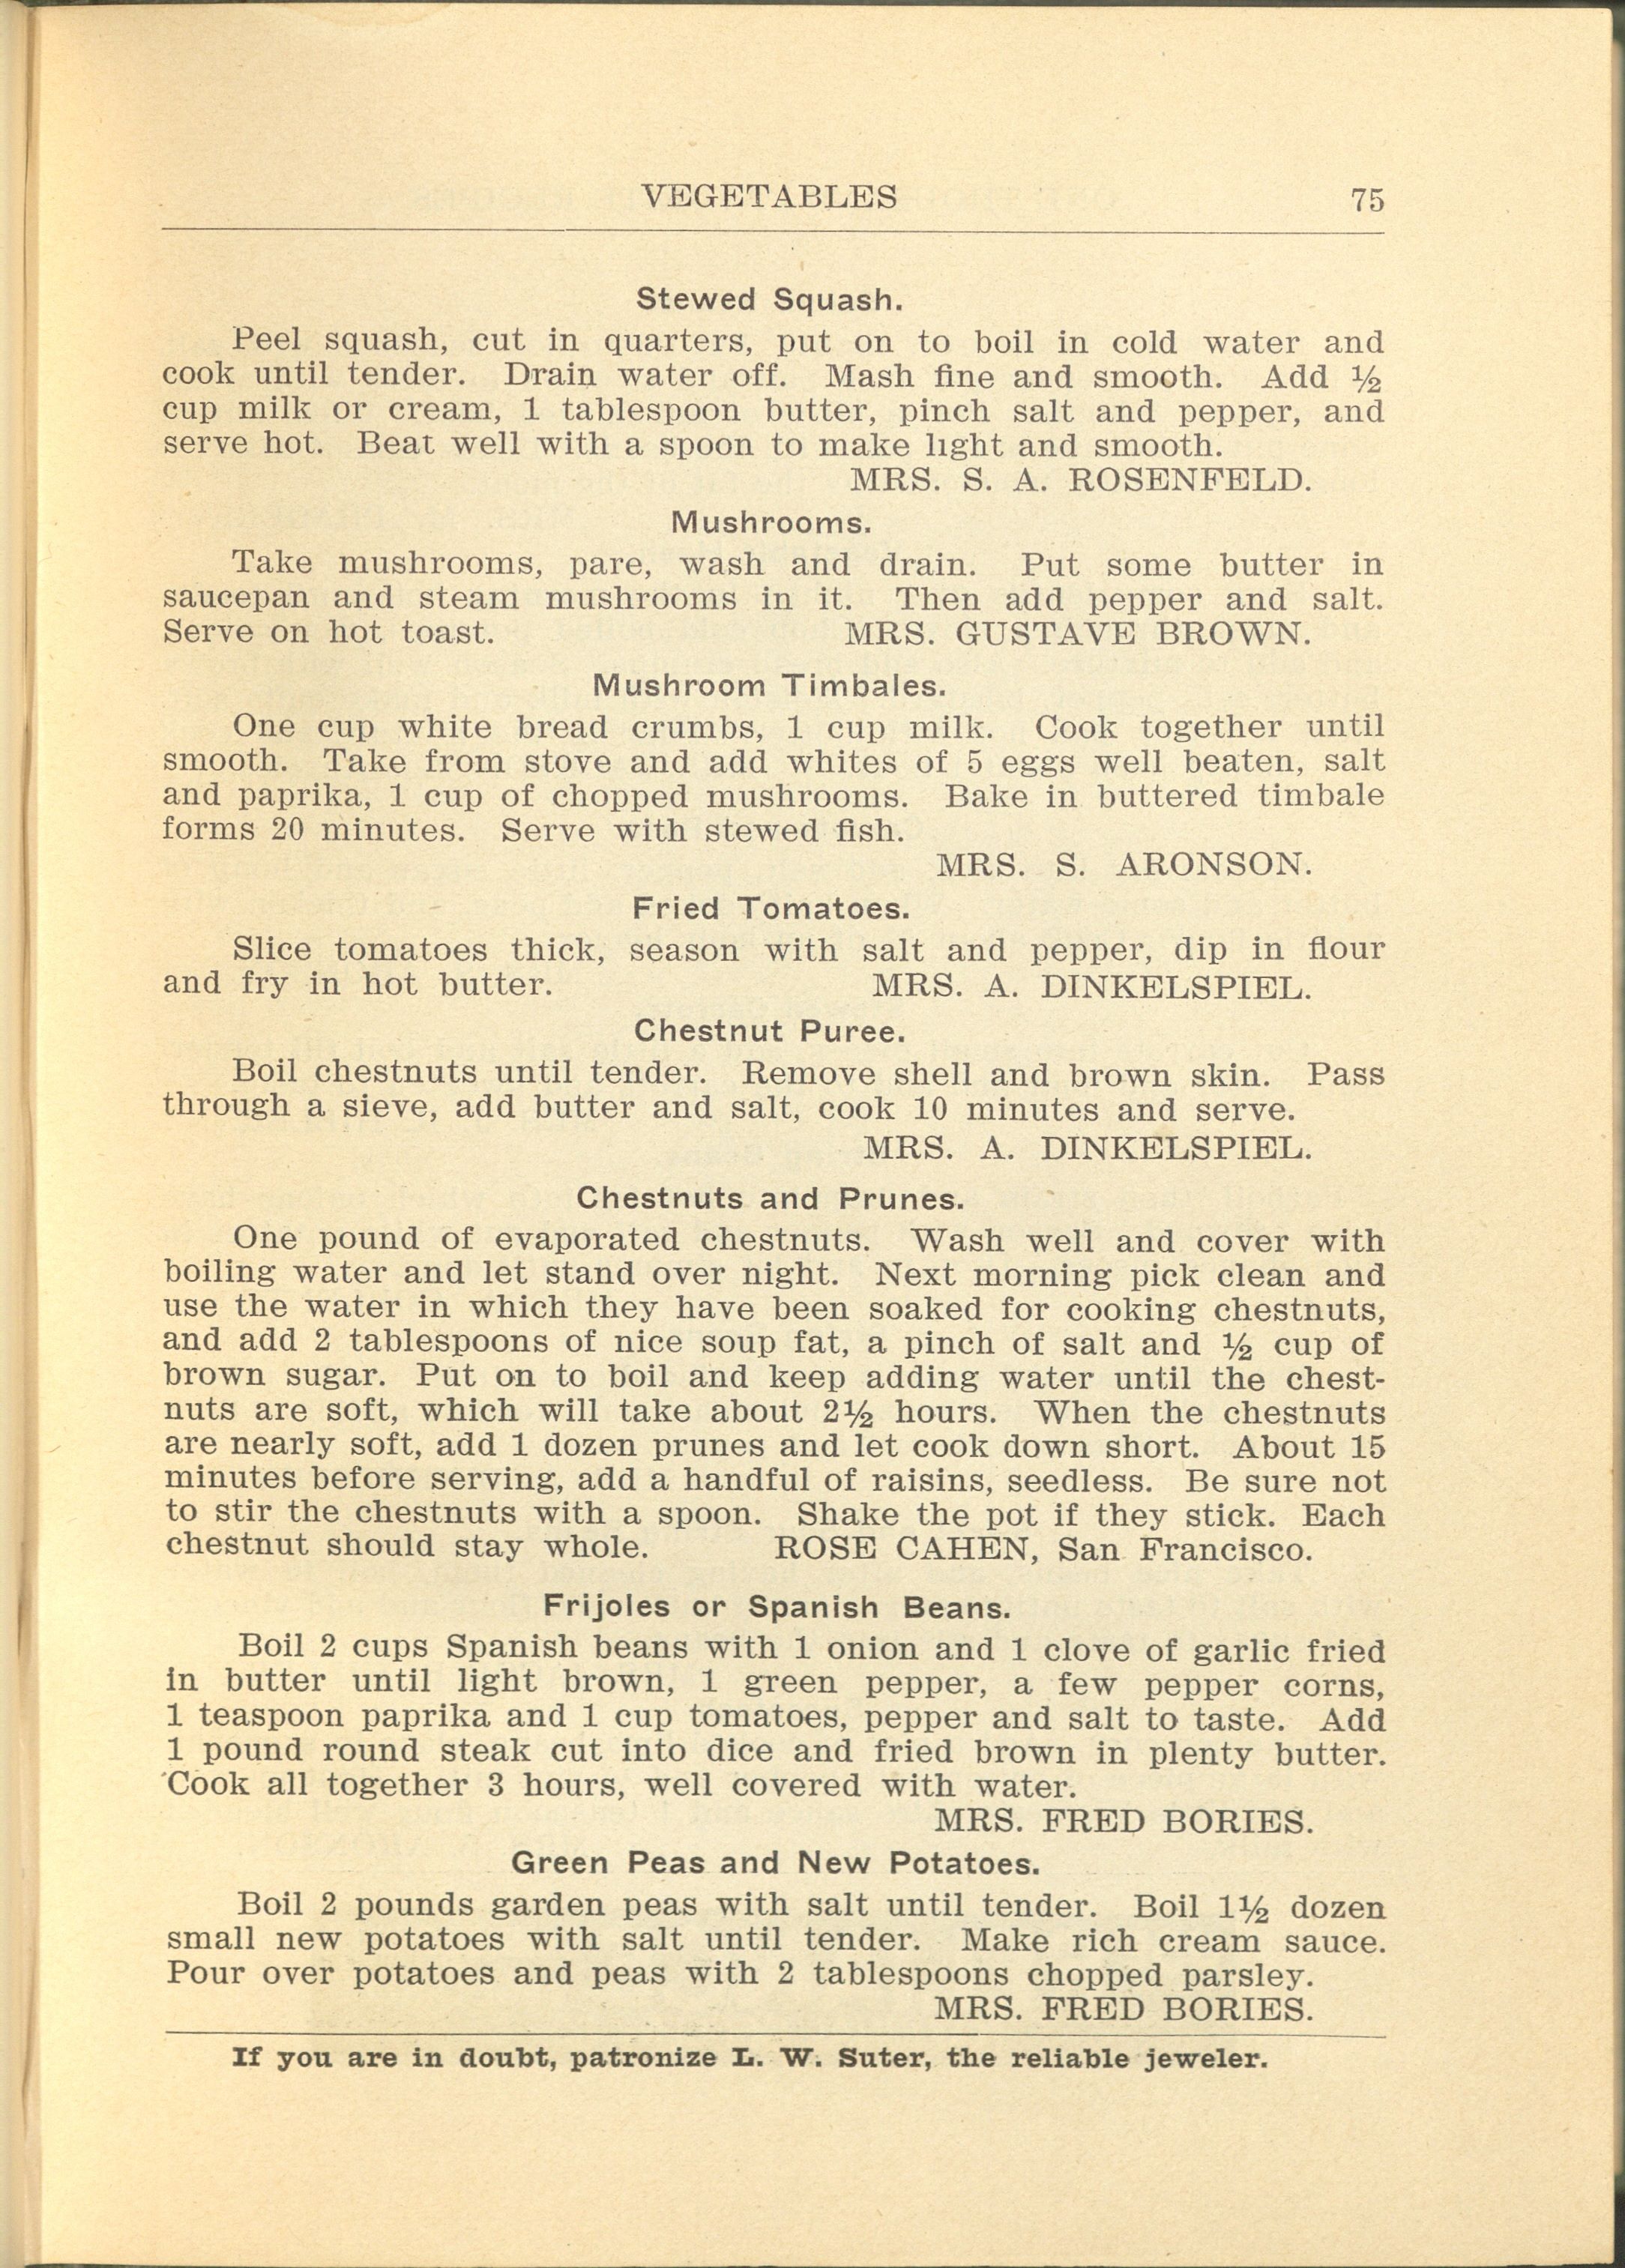 Page containing numerous brief recipes for vegetable dishes such as Stewed Squash, Mushroom Timbales, Frijoles or Spanish Beans, and Green Peas and New Potatoes